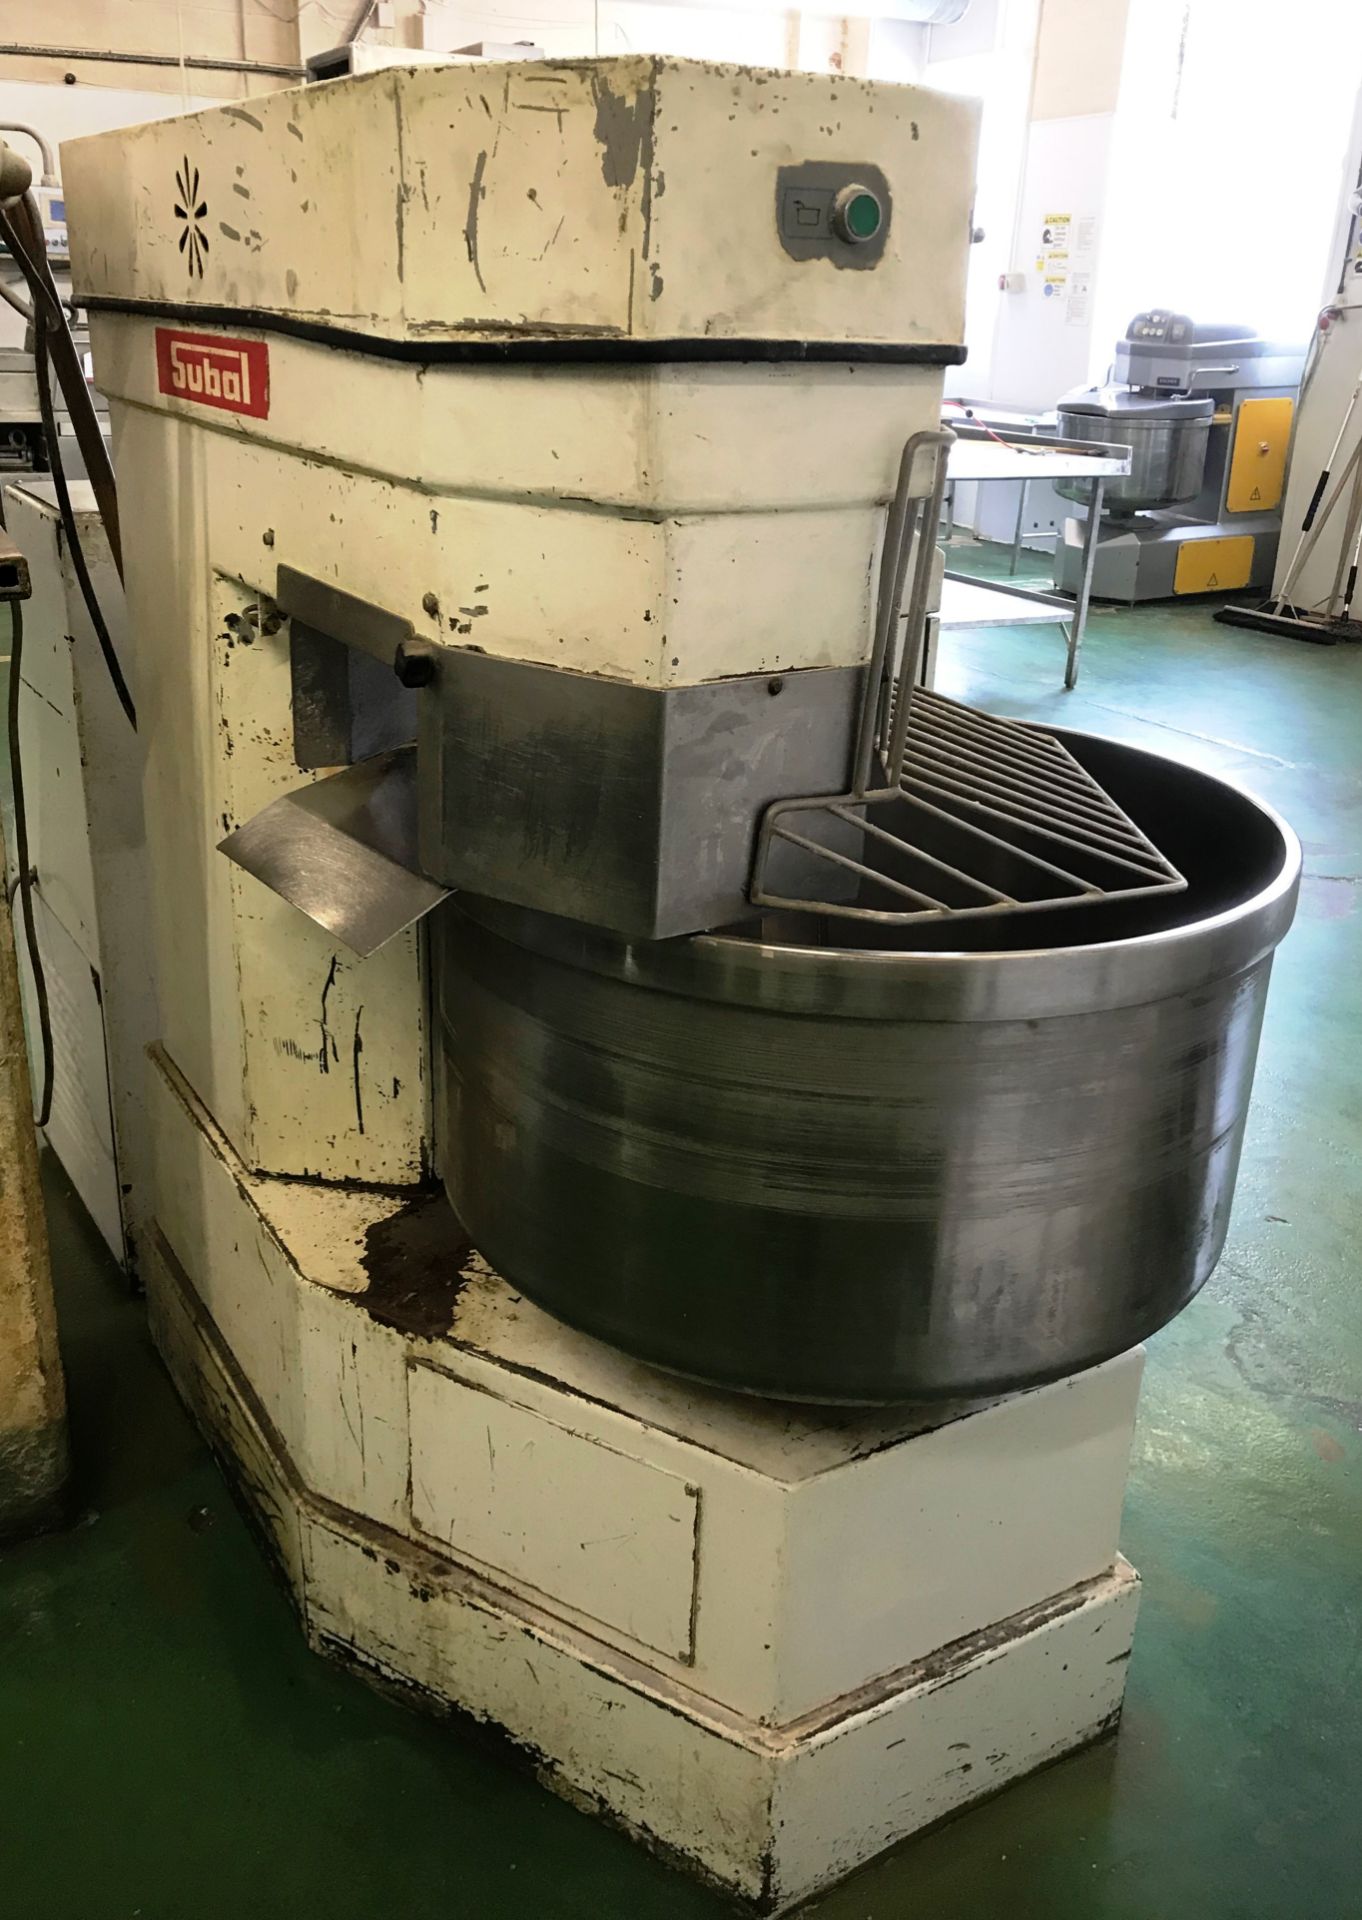 Subal AEX 80 Self-Emptying Sprial Mixer | 80kg | YOM: 2001 - Image 5 of 7